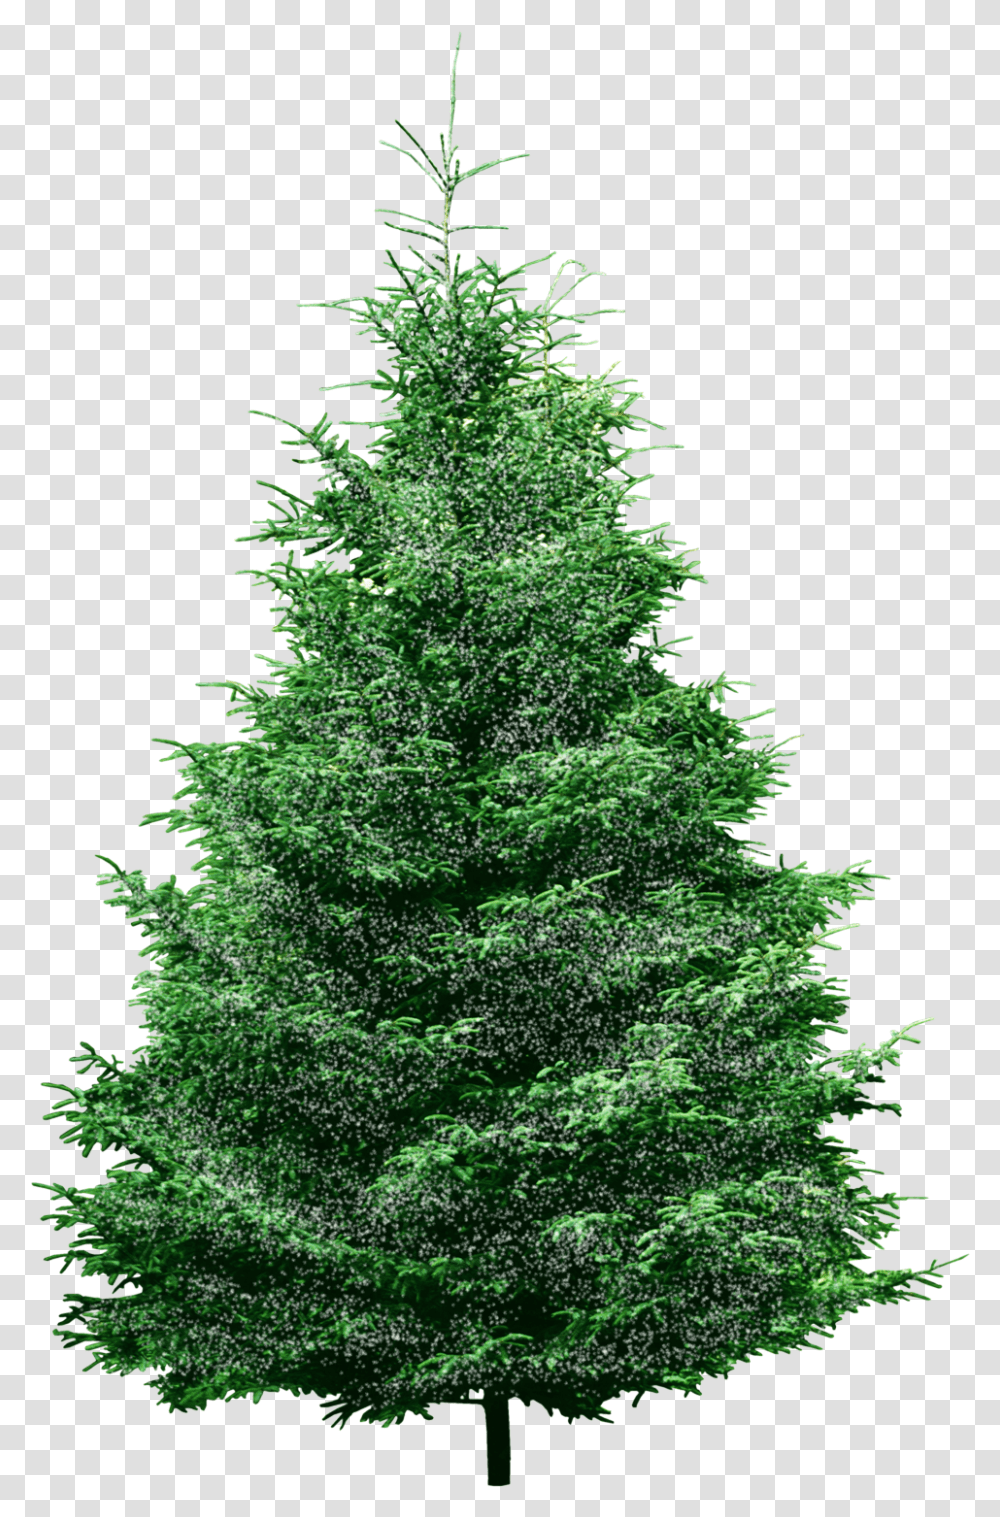 Spruce Tree - Sweet Pea Machine Embroidery Designs Background Pine Tree Clipart, Christmas Tree, Ornament, Plant, Fir Transparent Png